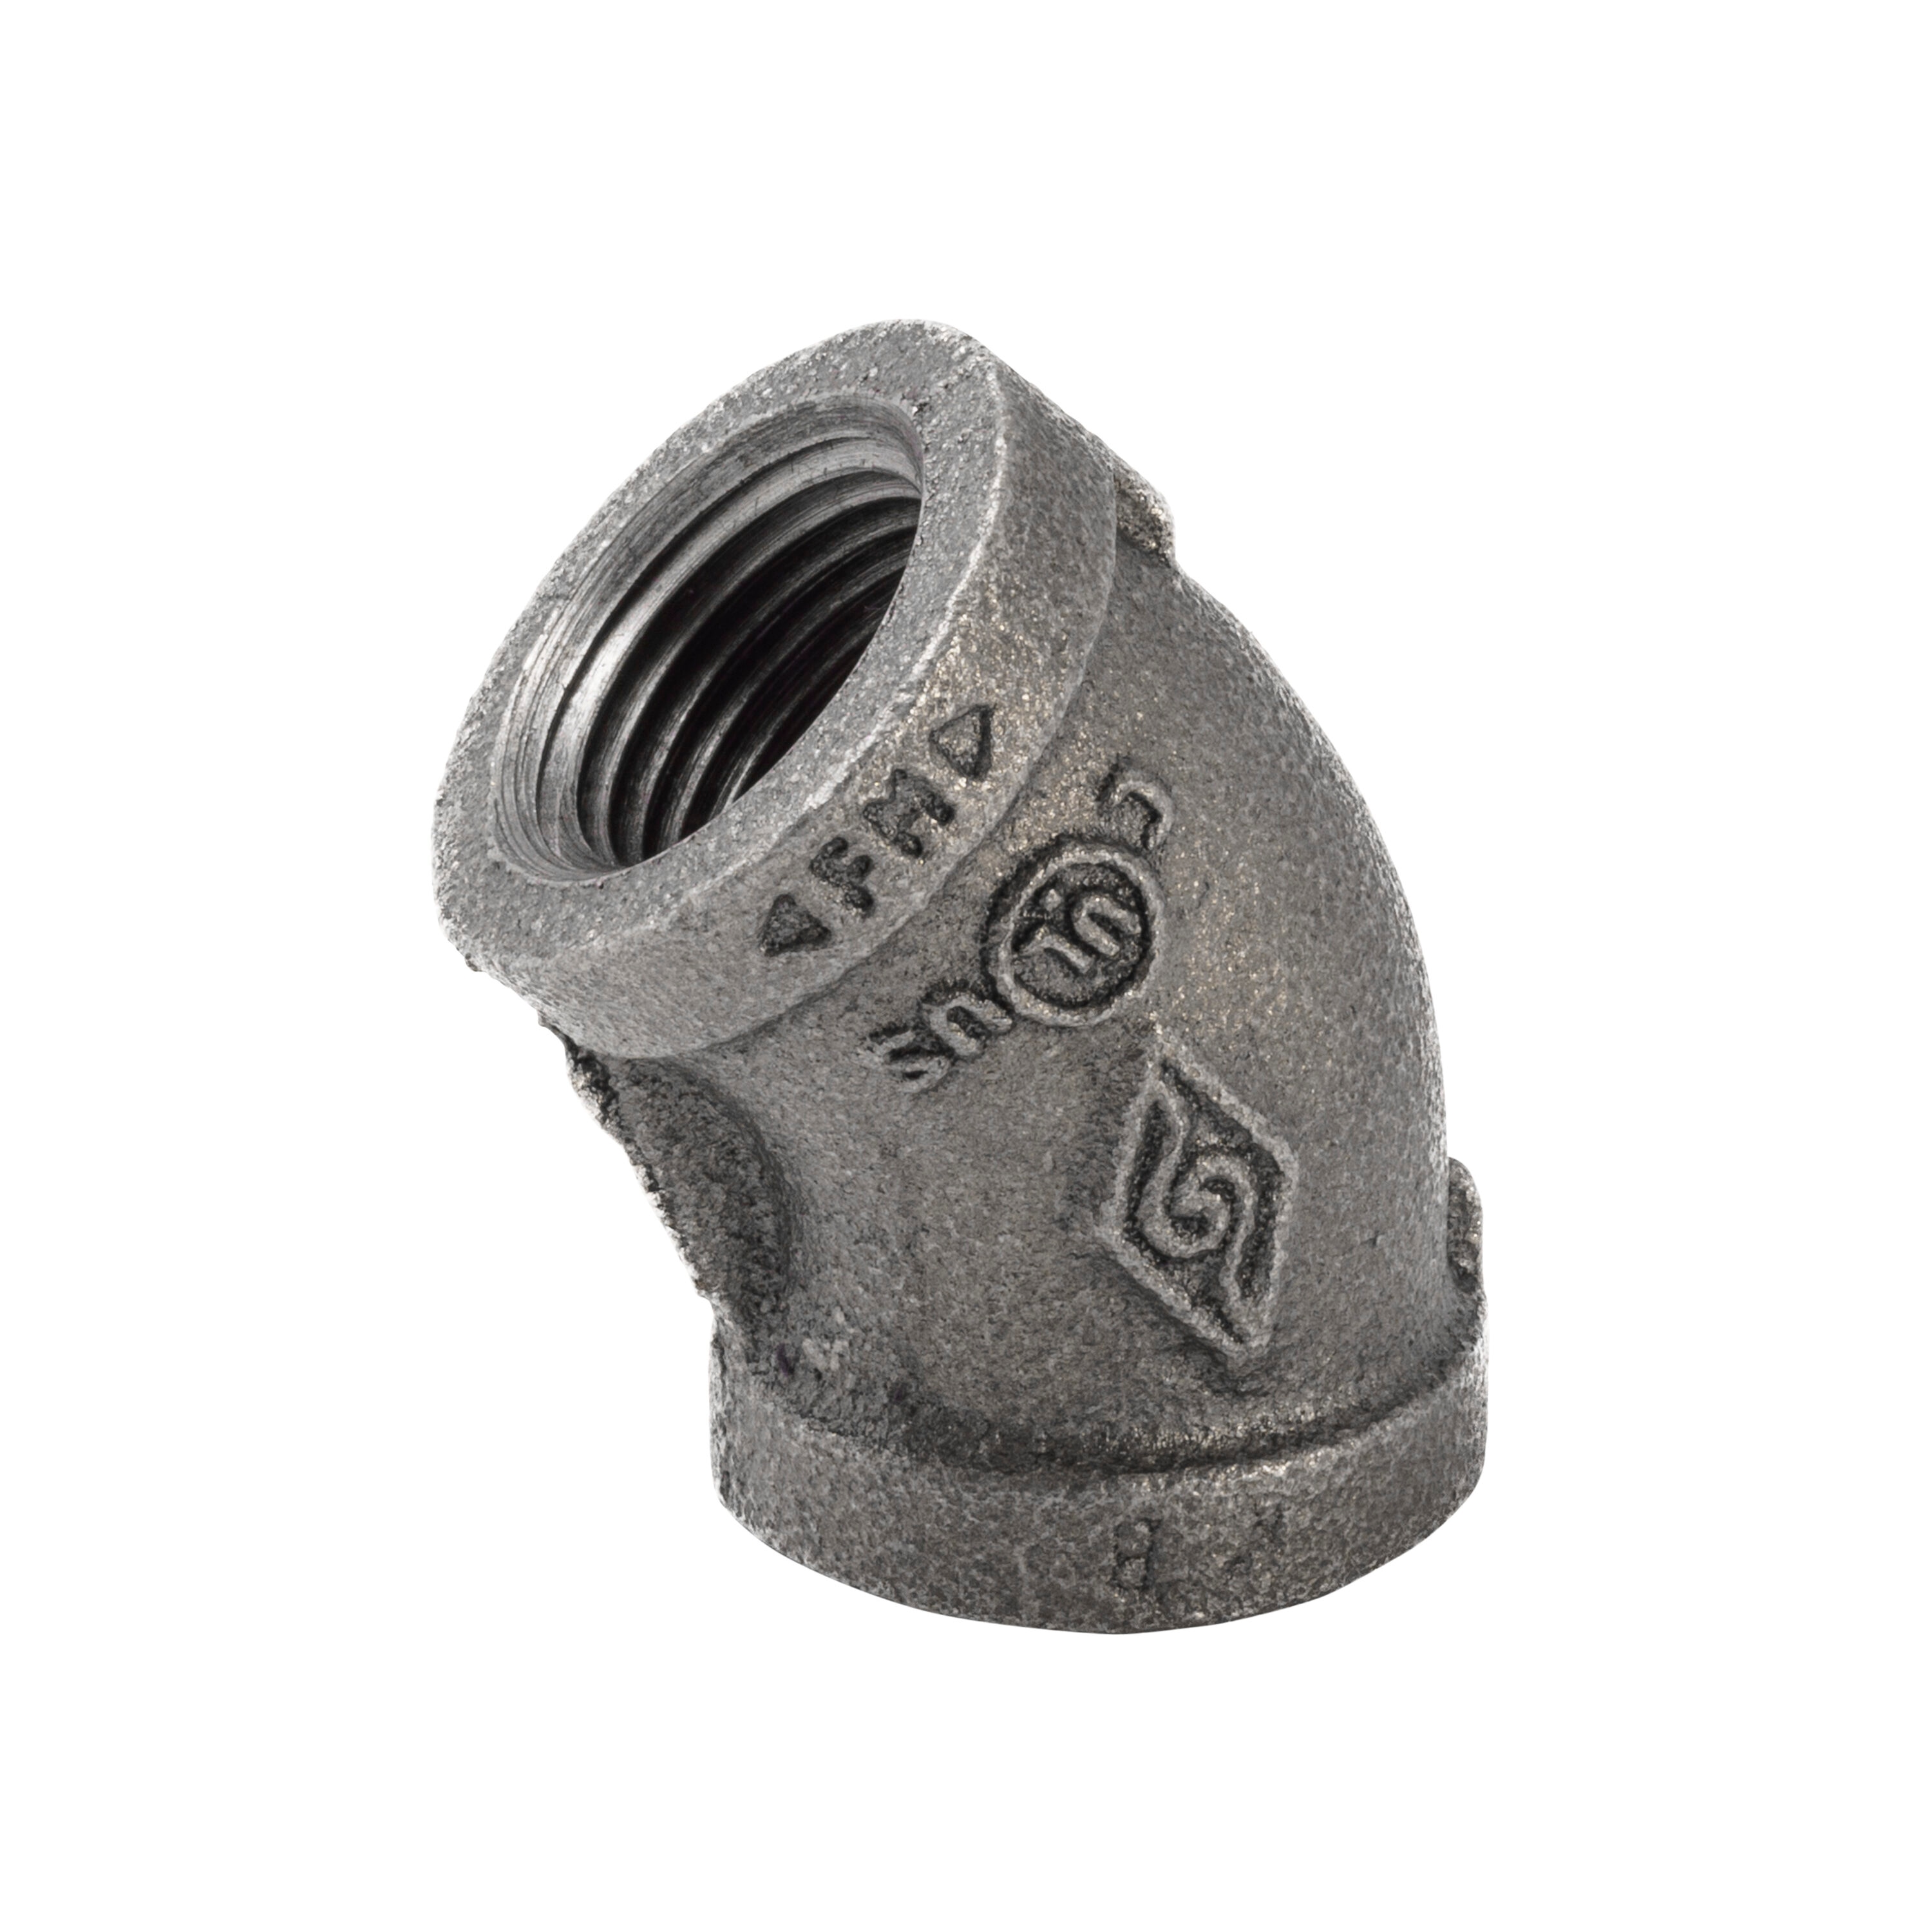 Black Pipe Fittings - 2 NPT Union Elbow (Brass Seat), 300# UL Listed